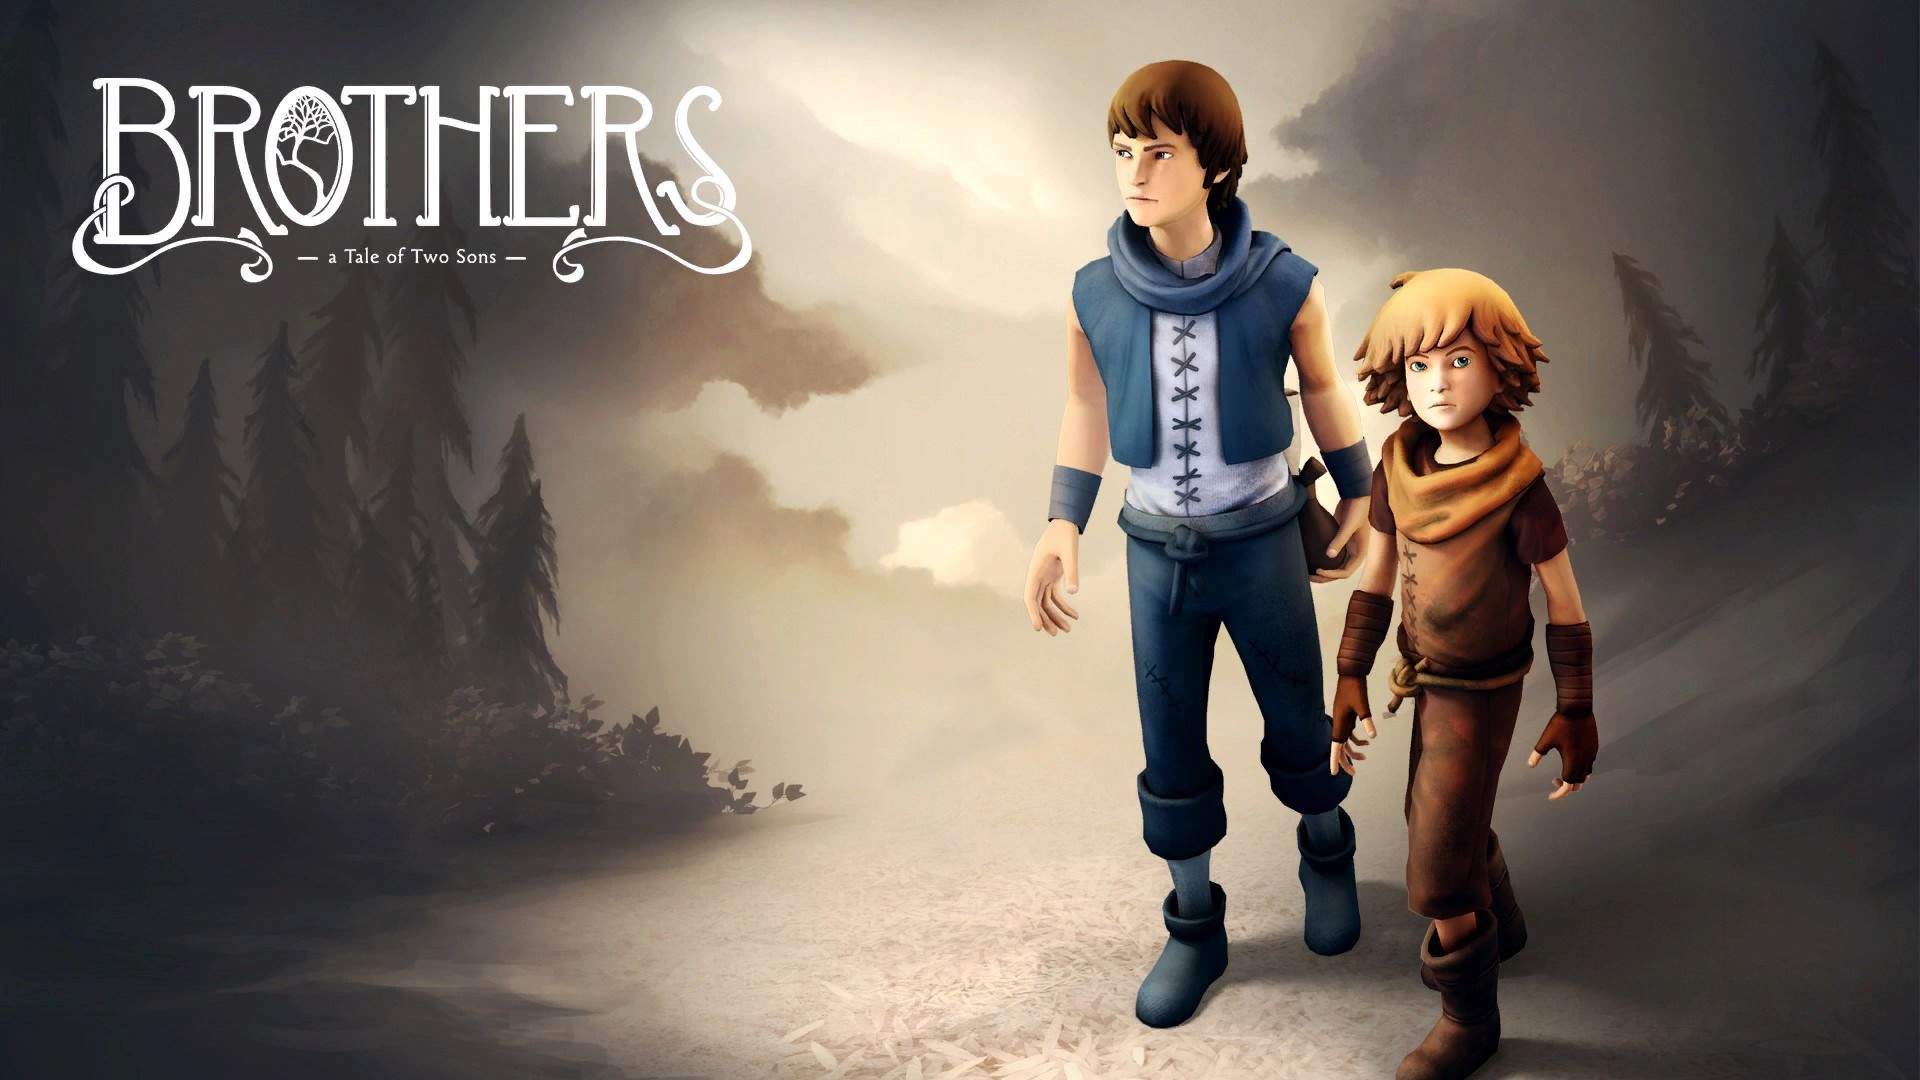 Brothers-A-Tale-of-Two-Sons